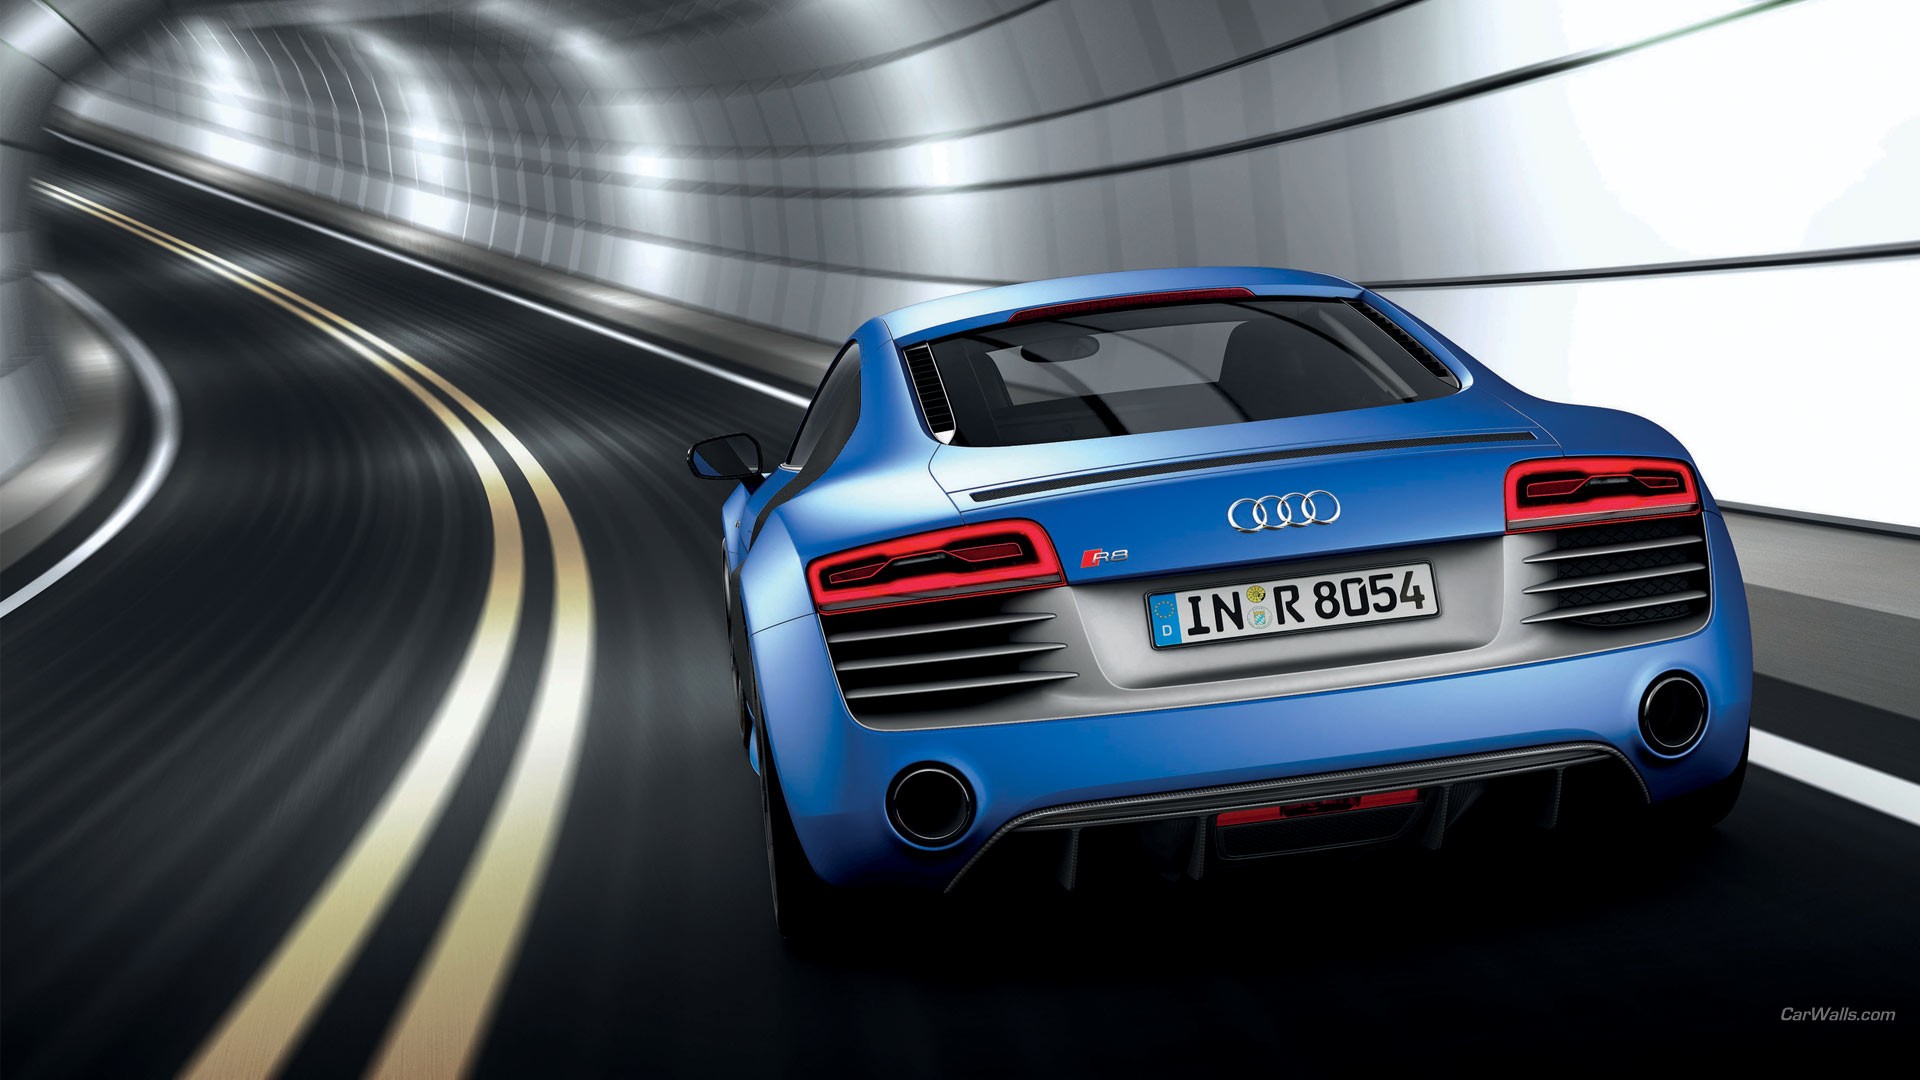 General 1920x1080 Audi R8 car rear view tunnel blue cars numbers vehicle